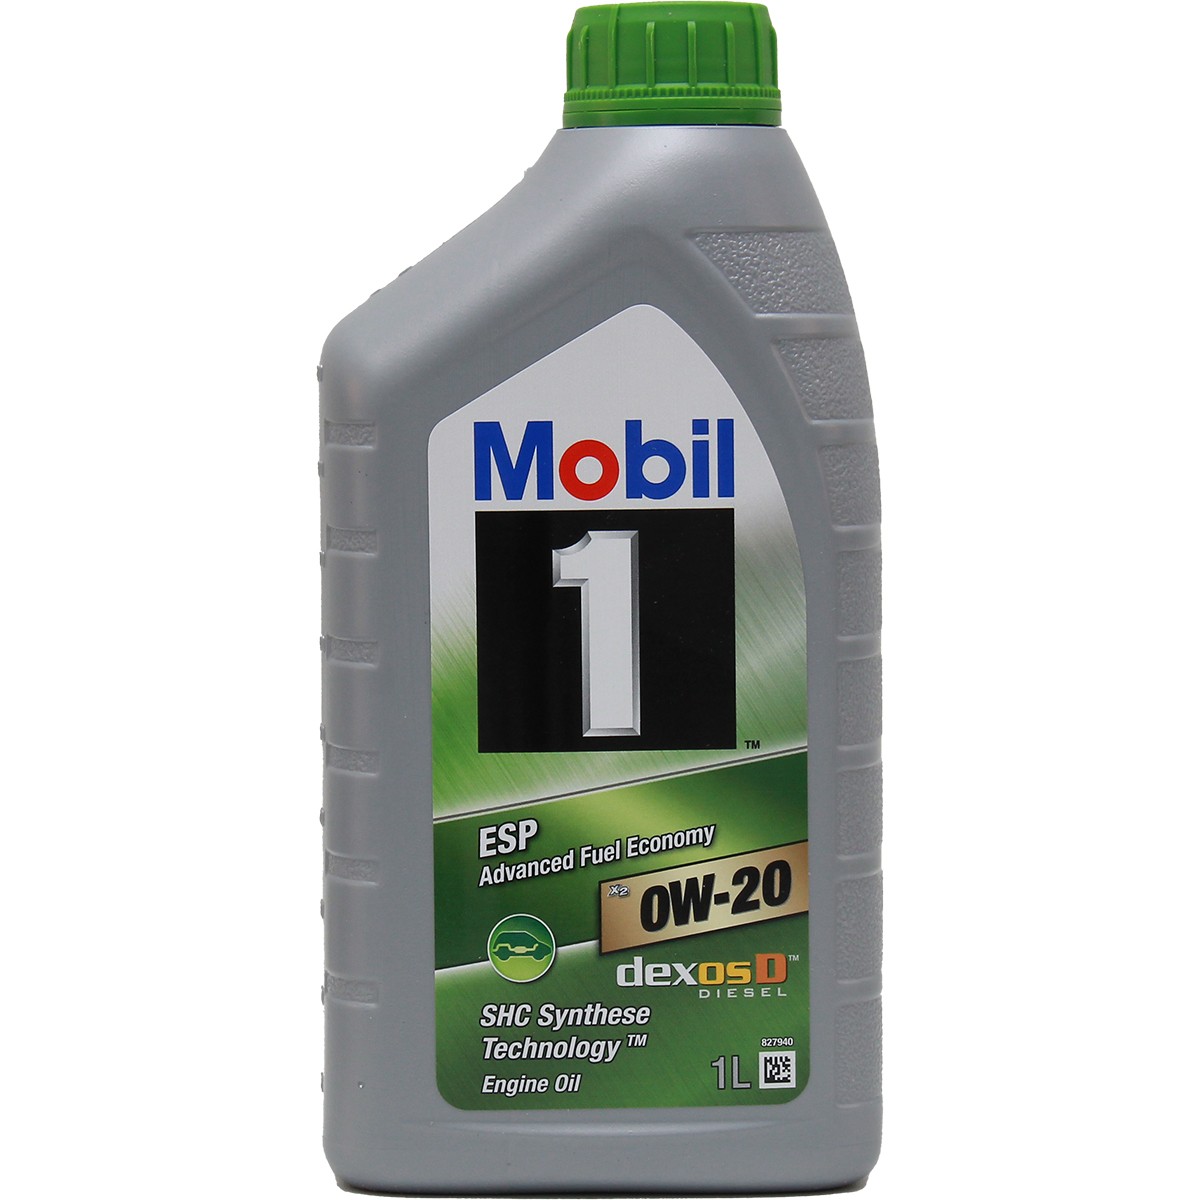  Mannol Full Synthetic Longlife 508/509 0W-20 Engine Oil for the  latest of Volkswagen turbocharged gasoline - 0W-20 (5L) : Automotive